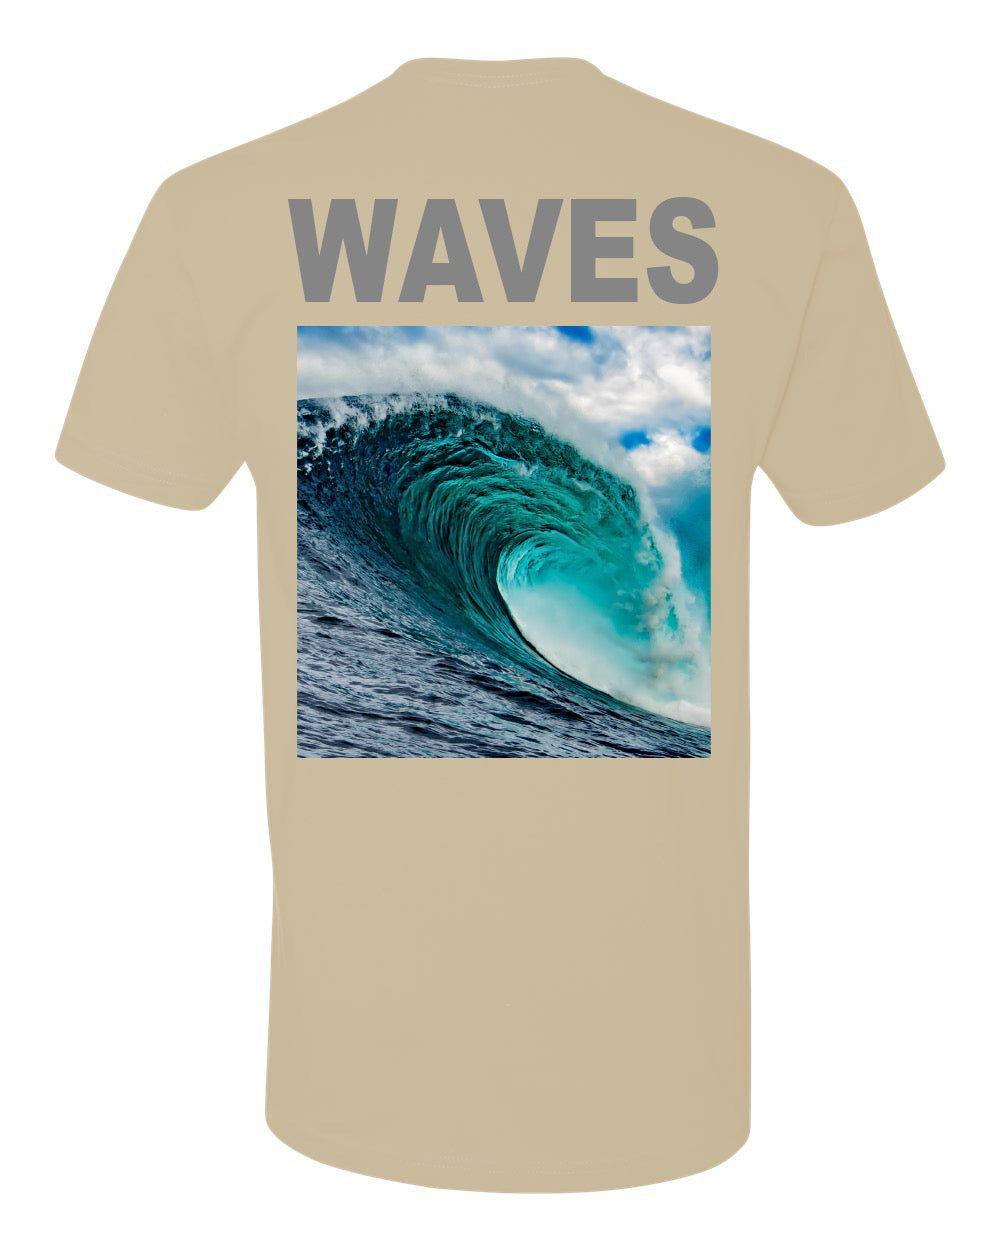 RIDE THE WAVE T-SHIRT 3M - SAND